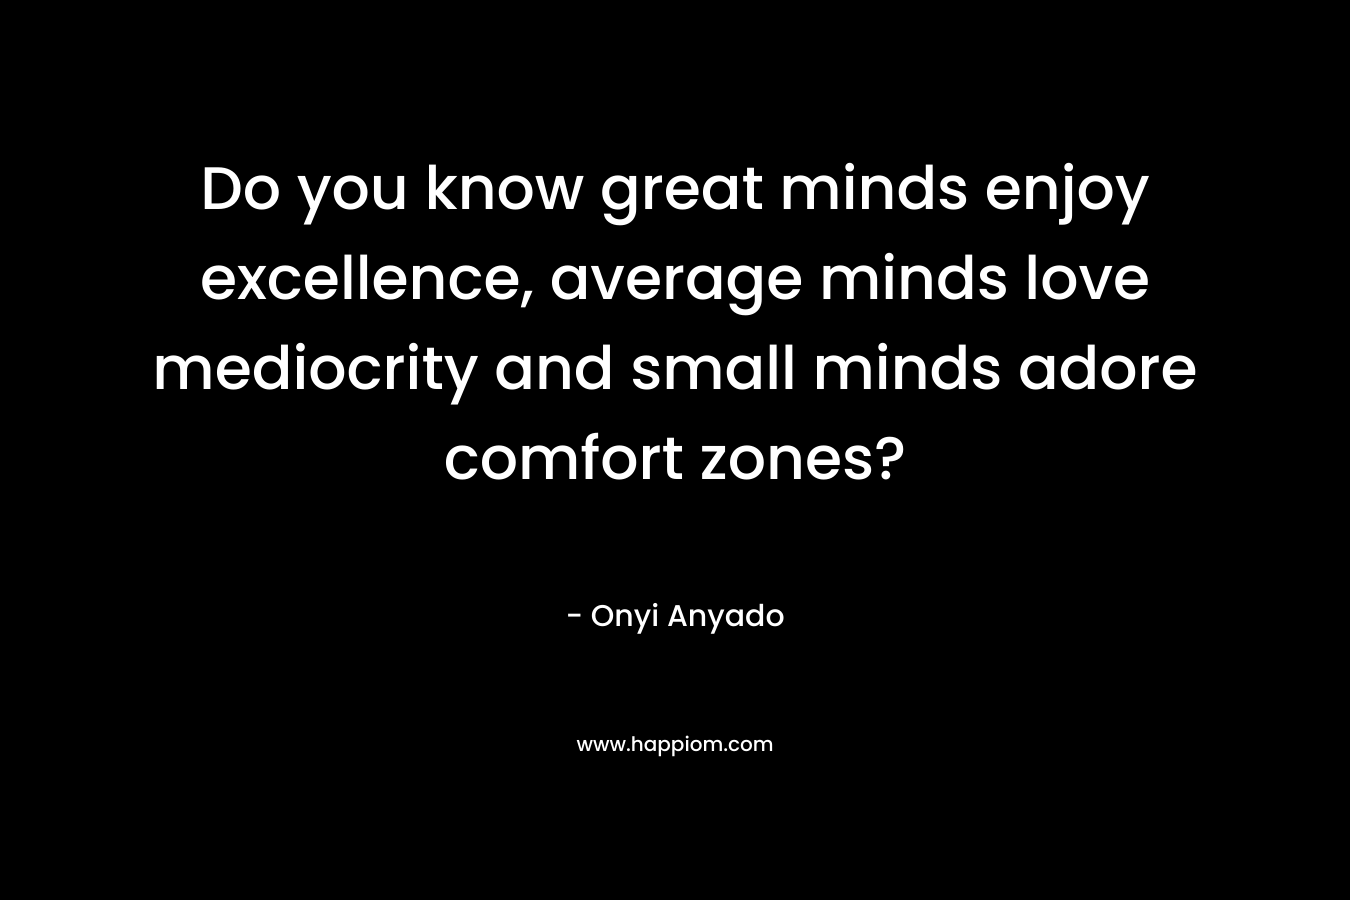 Do you know great minds enjoy excellence, average minds love mediocrity and small minds adore comfort zones? – Onyi Anyado